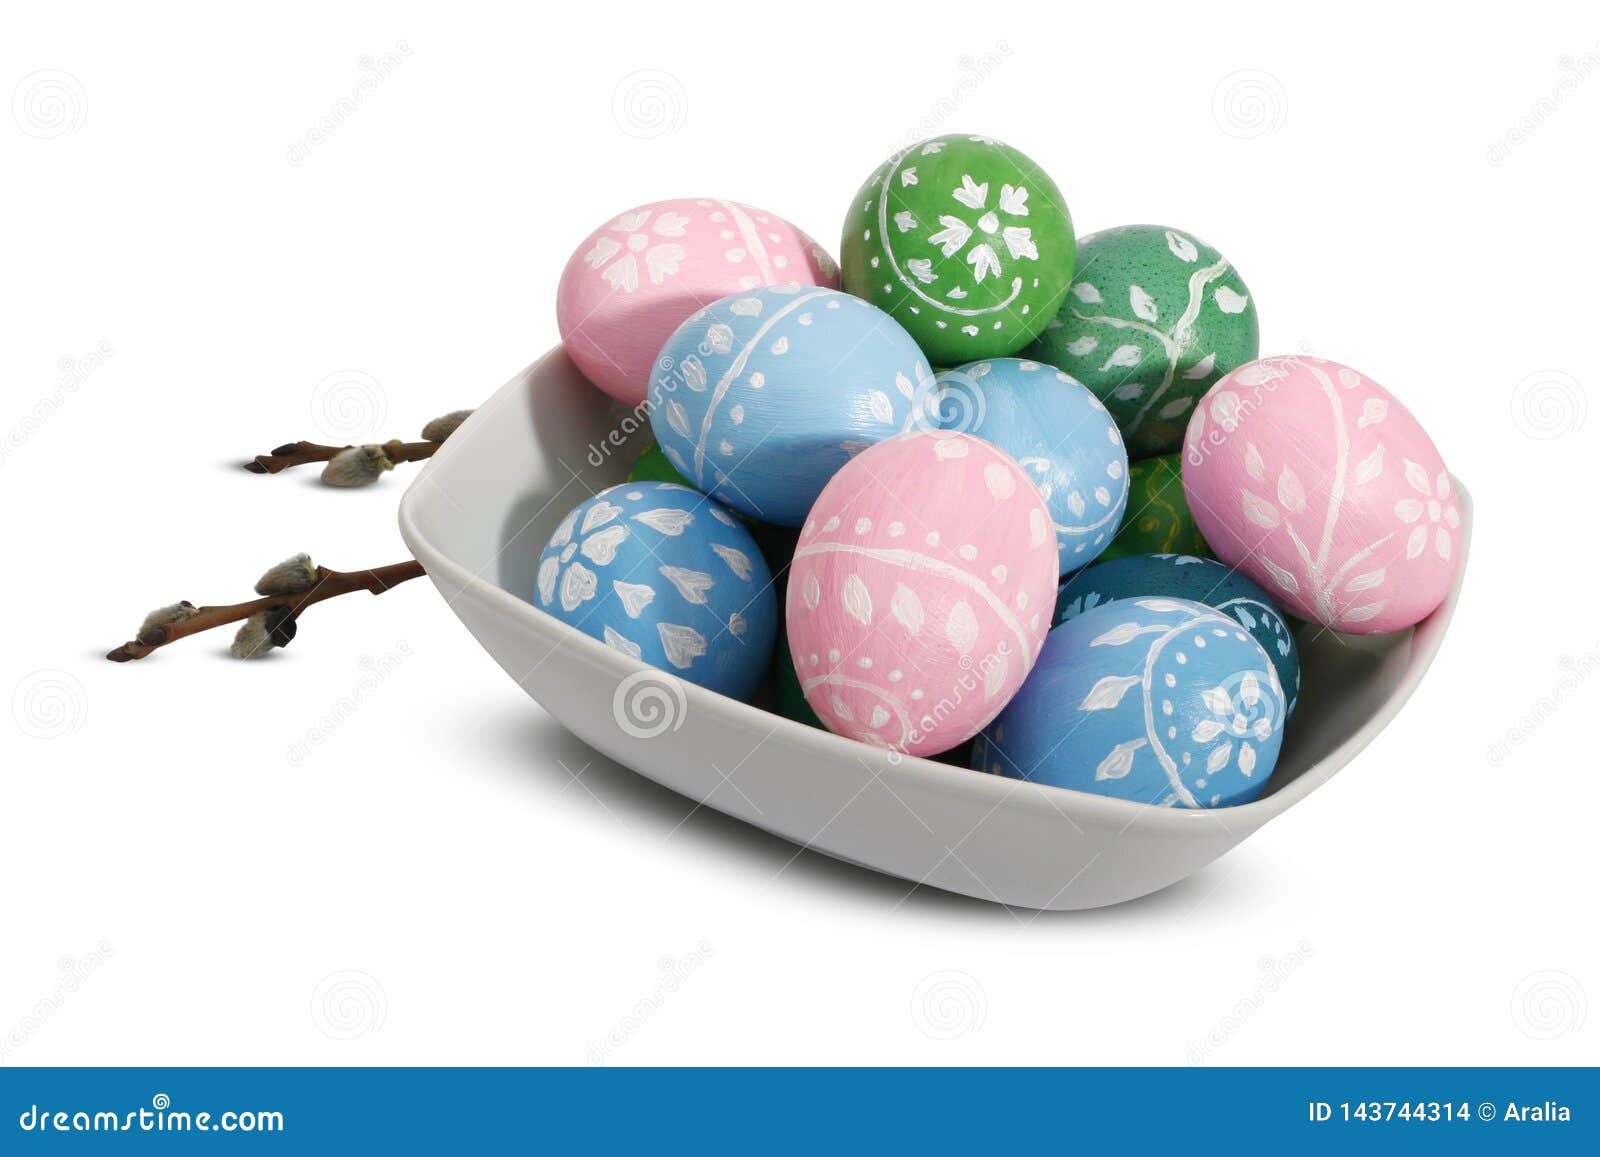 Easter Plate with Easter Eggs on Wnite Background Stock Photo - Image ...